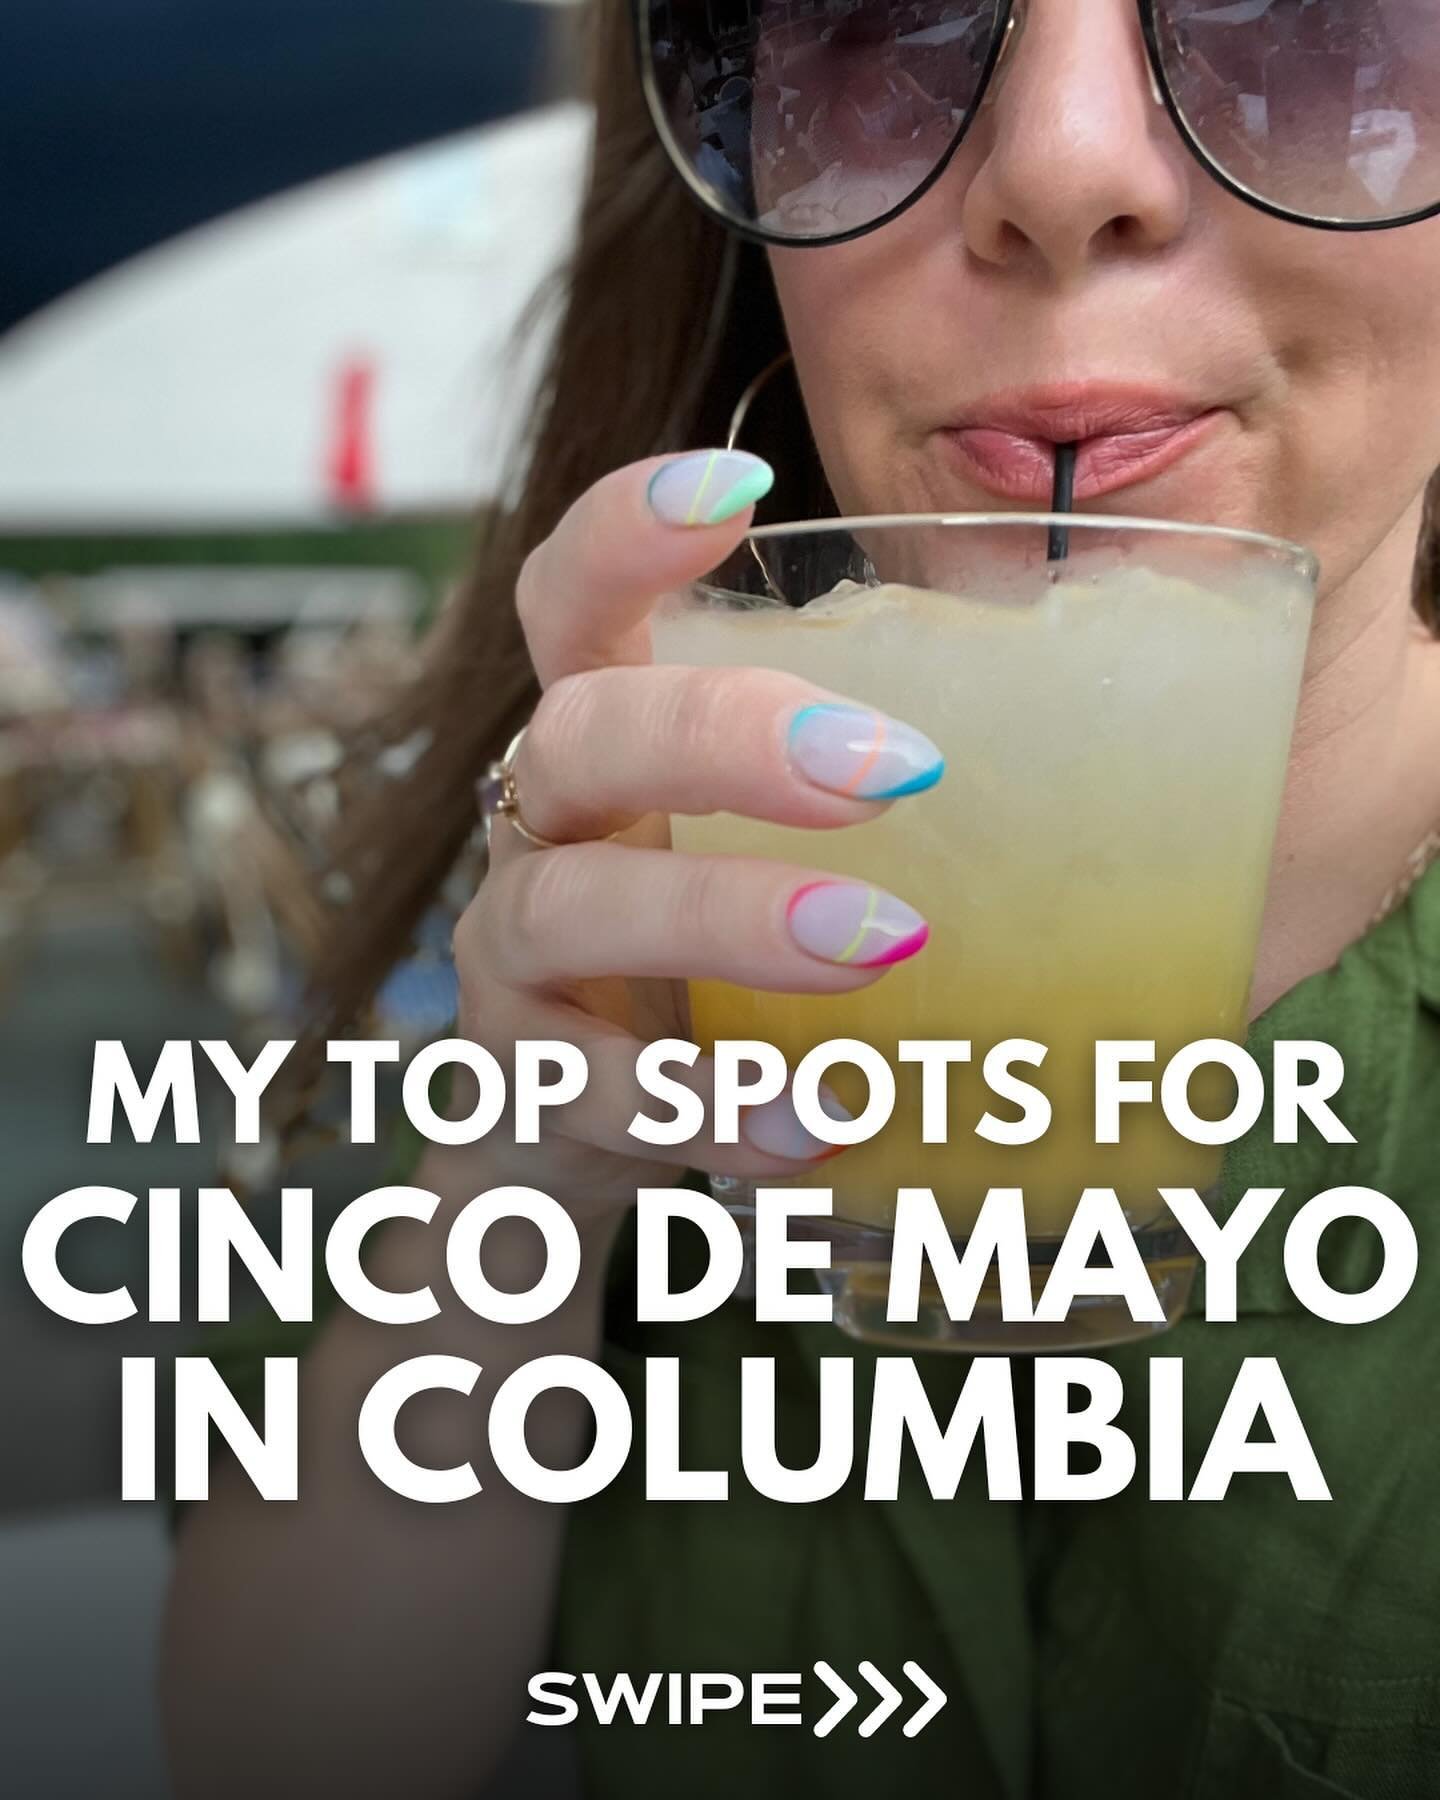 Who&rsquo;s ready for nachos and a spicy marg? 🎉 Here are my top spots around the midlands to celebrate Cinco de Mayo this weekend! 👇🏻

🌮 @coa_agaveria 
🌮 @barrio_southcarolina 
🌮 @cantina76main 

What&rsquo;s your go-to spot?

#cincodemayo #co